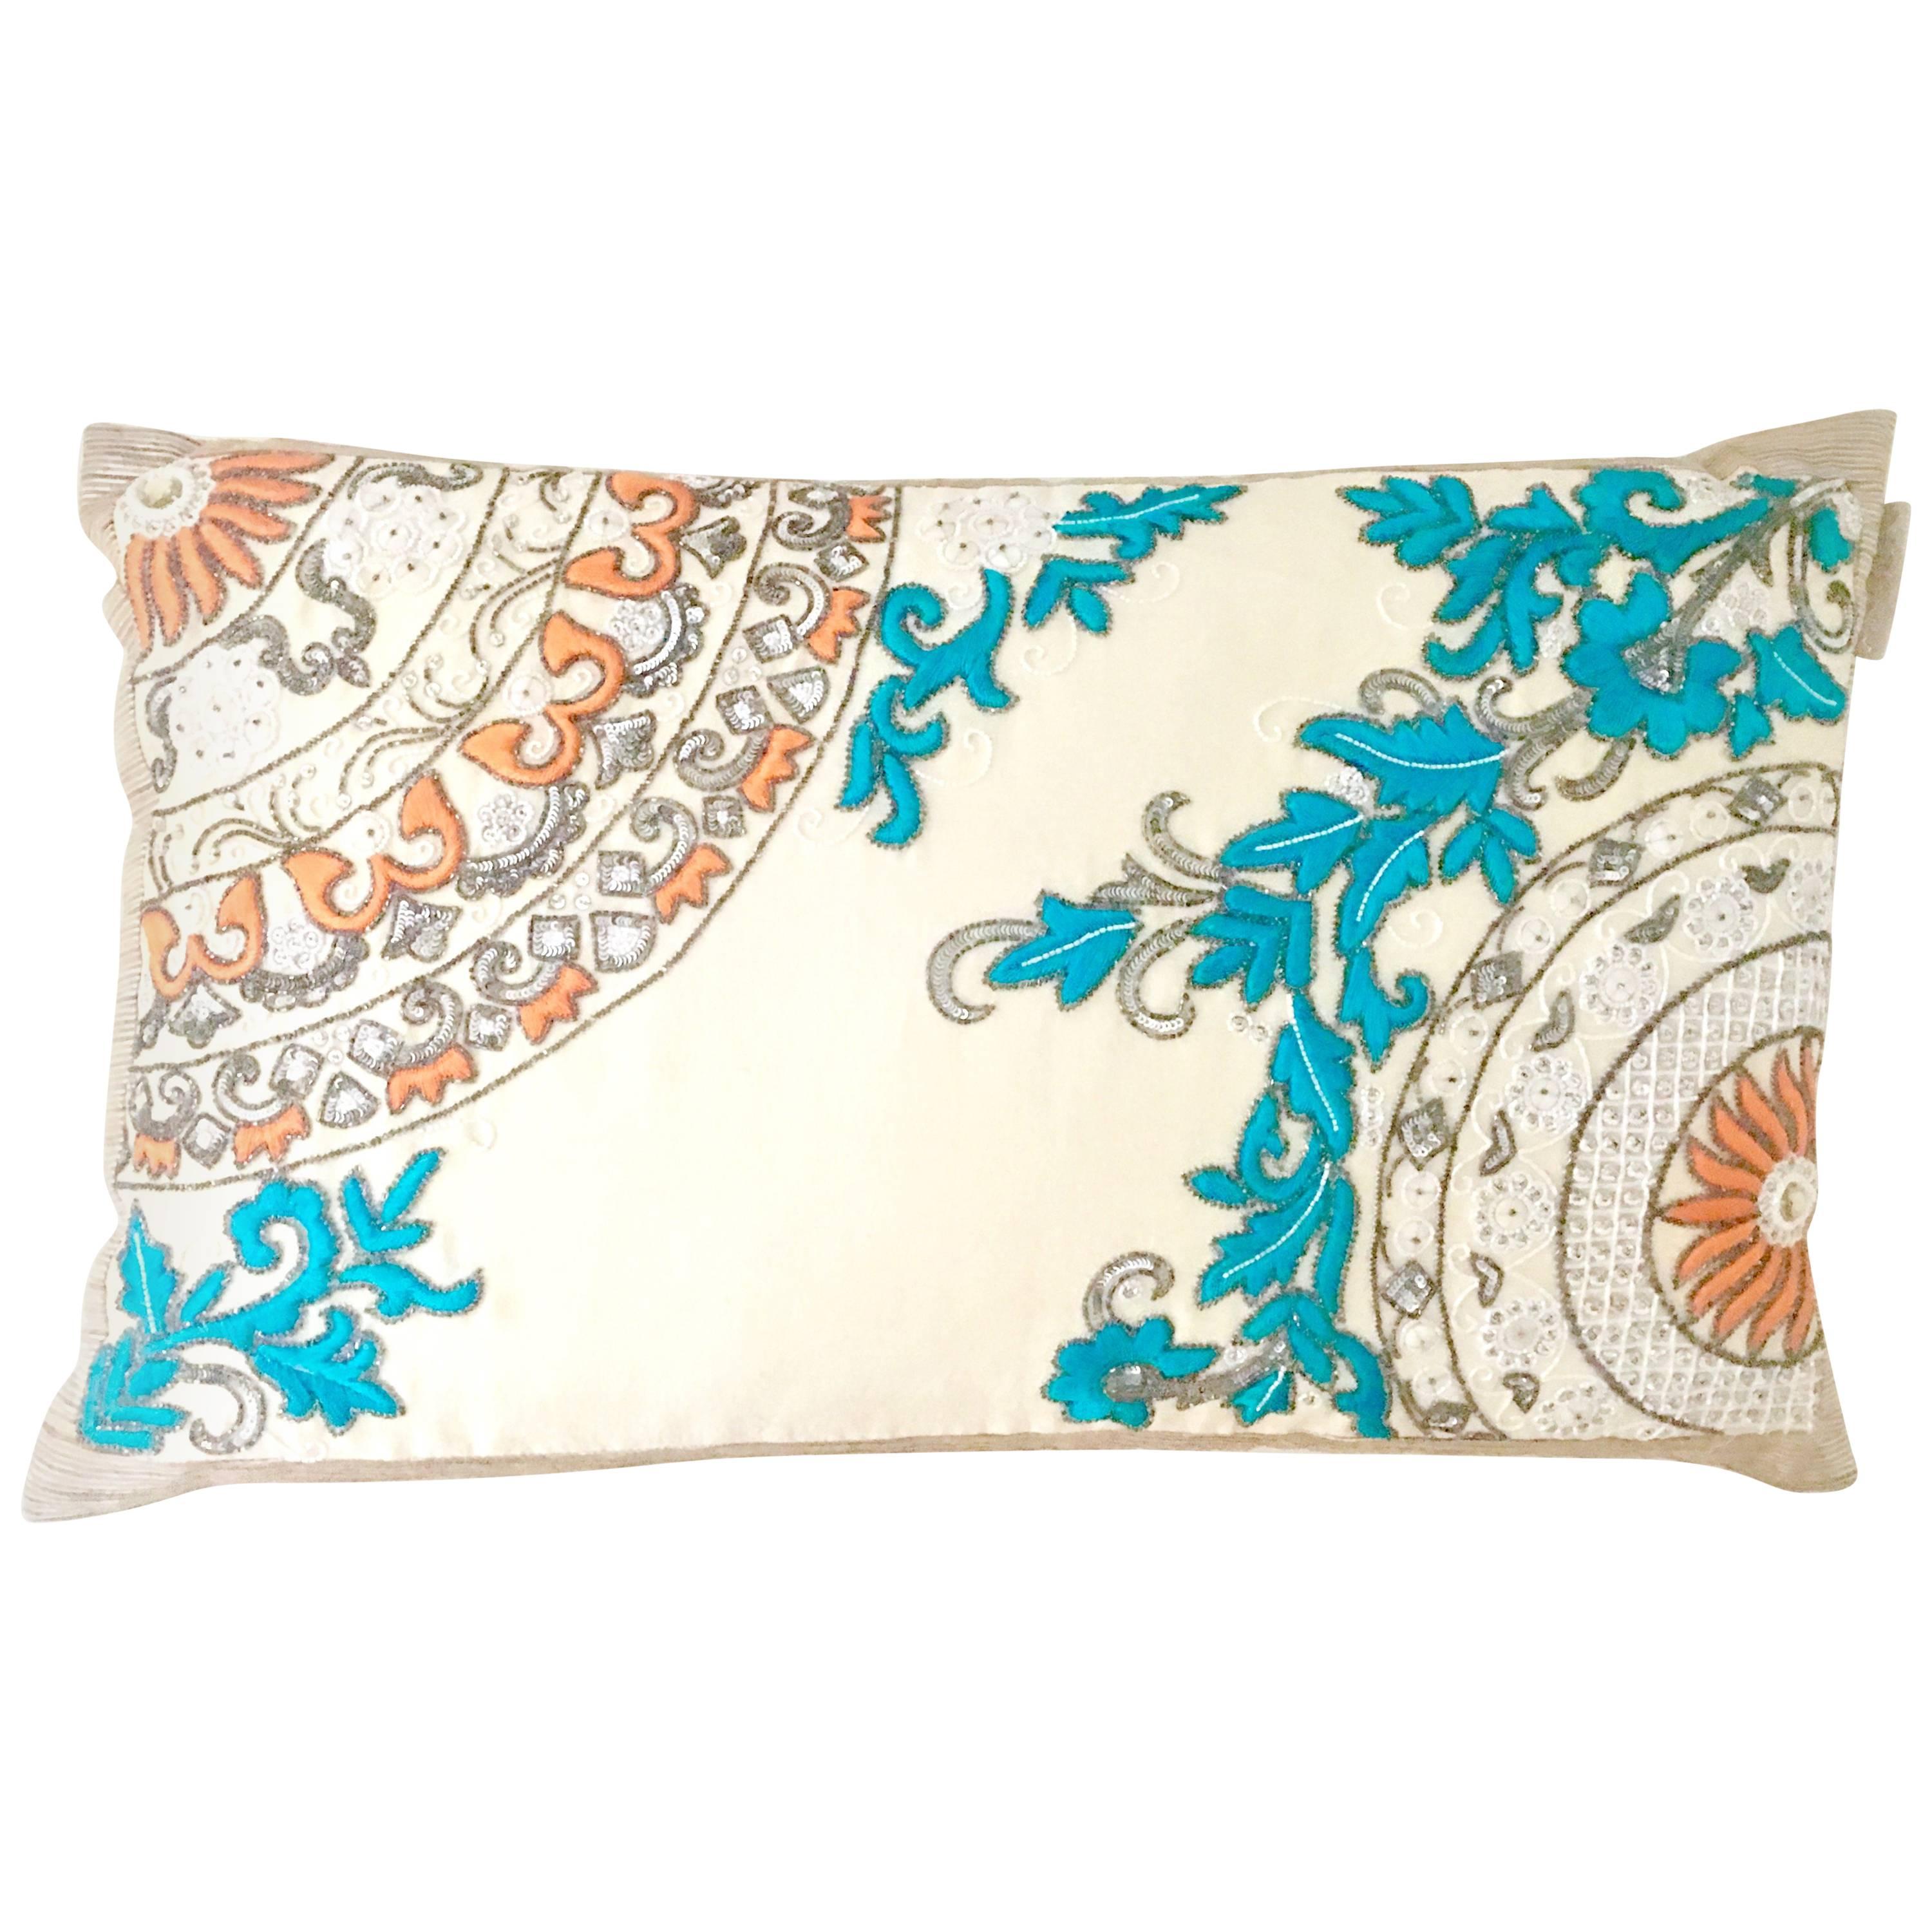 21st Century Moroccan Style Silk Embroidered Down Pillow By, Sivaana